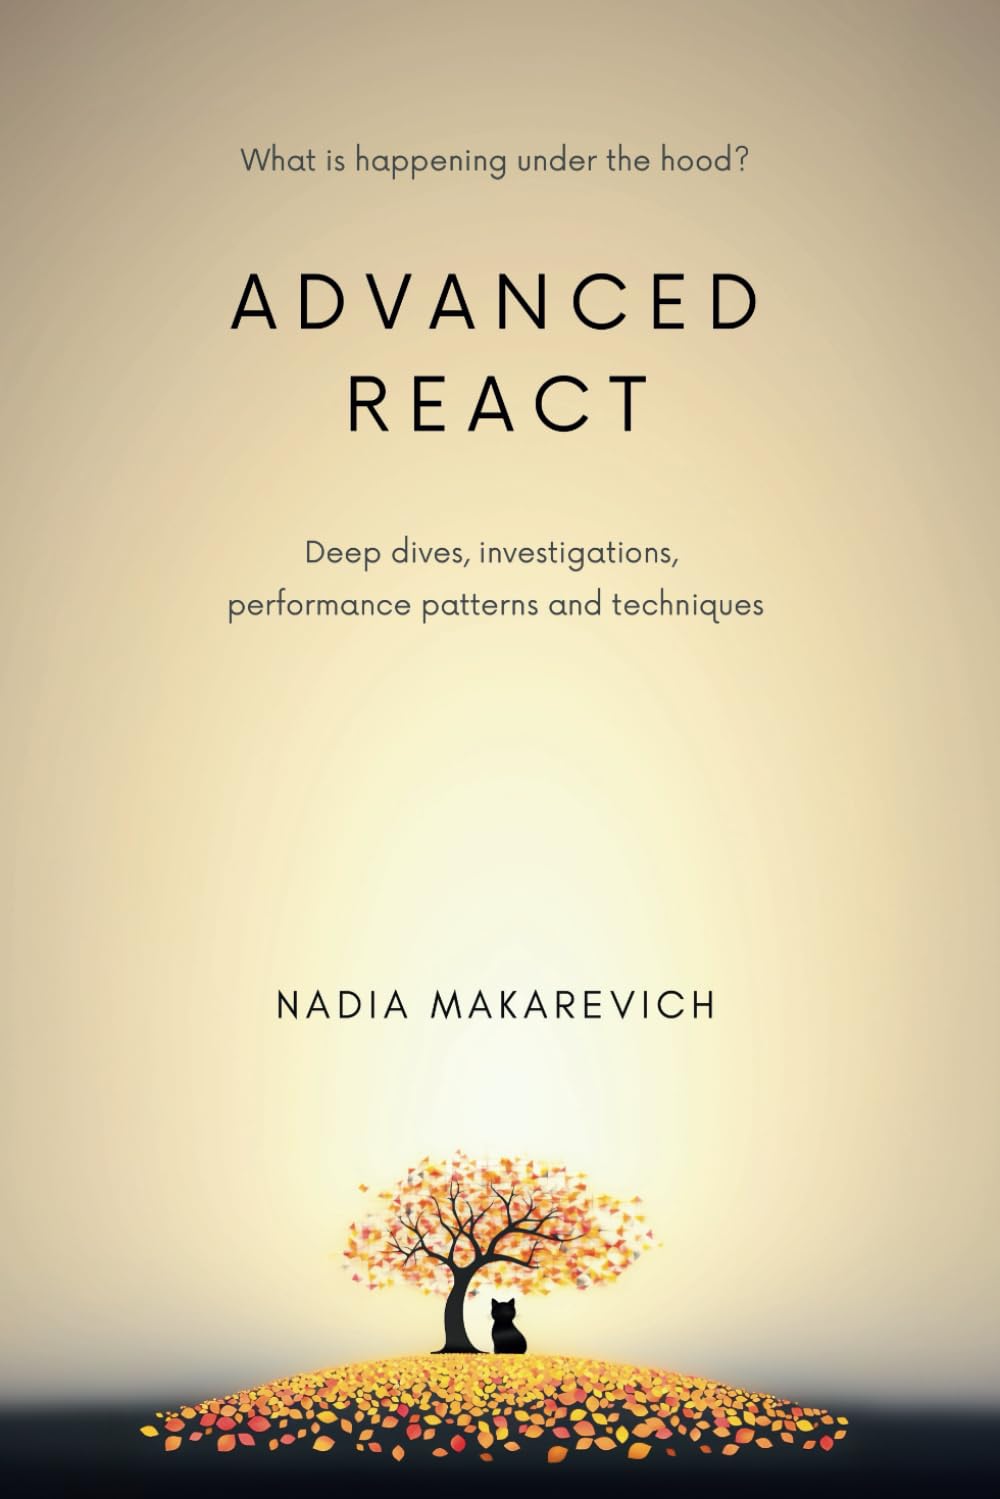 Advanced React: Deep dives, investigations, performance patterns and techniques